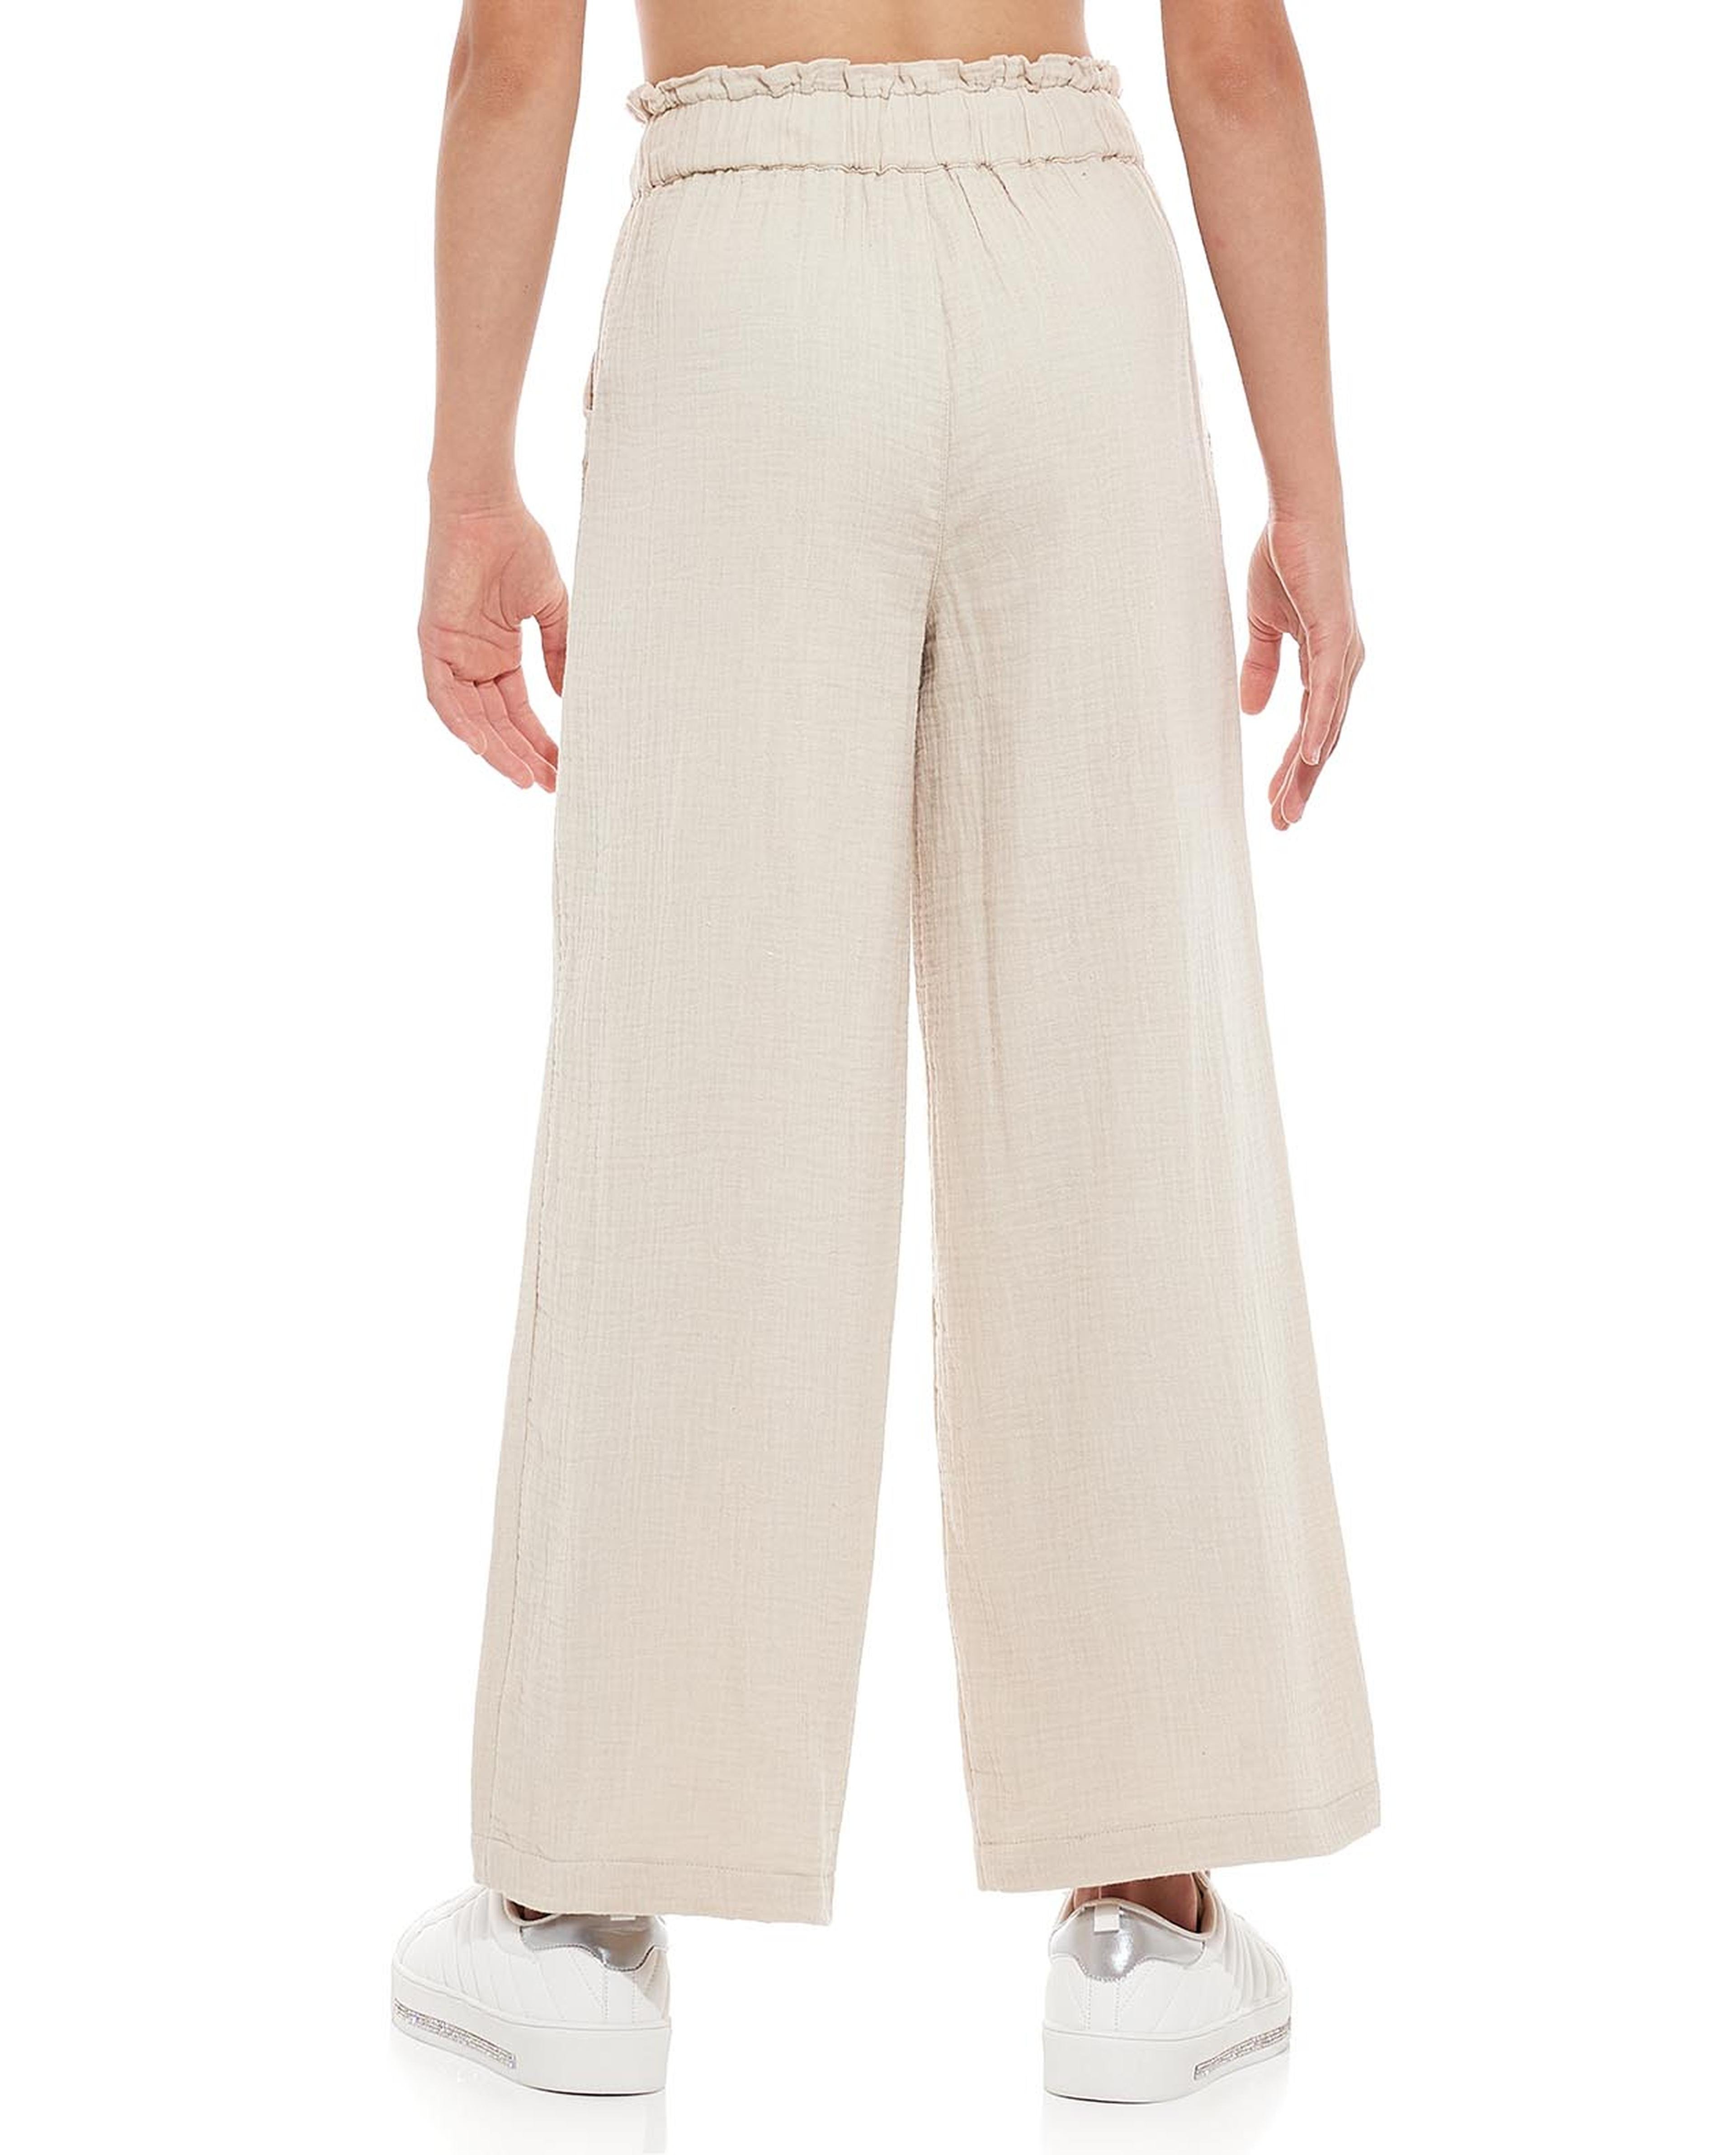 Embroidered Wide Leg Pants with Drawstring Waist